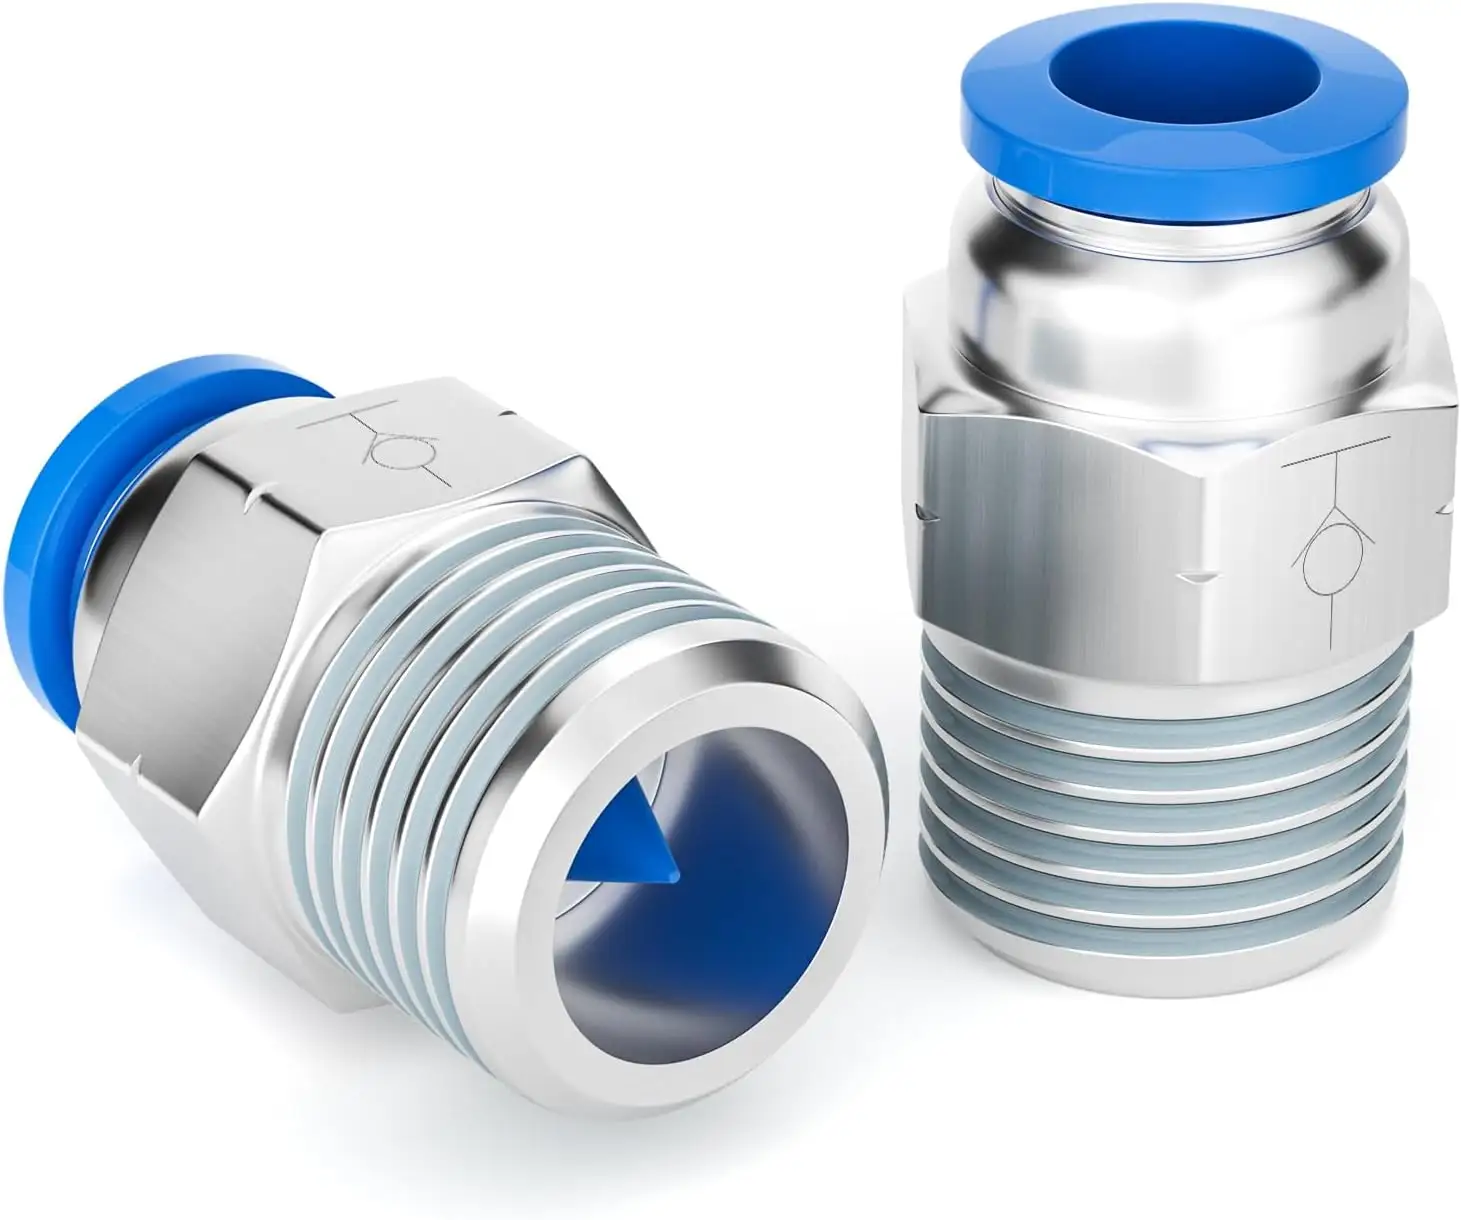 Male Straight Tube OD x Thread Check Valve Through Air Line Quick Insert Check Valve Adapter BSPC